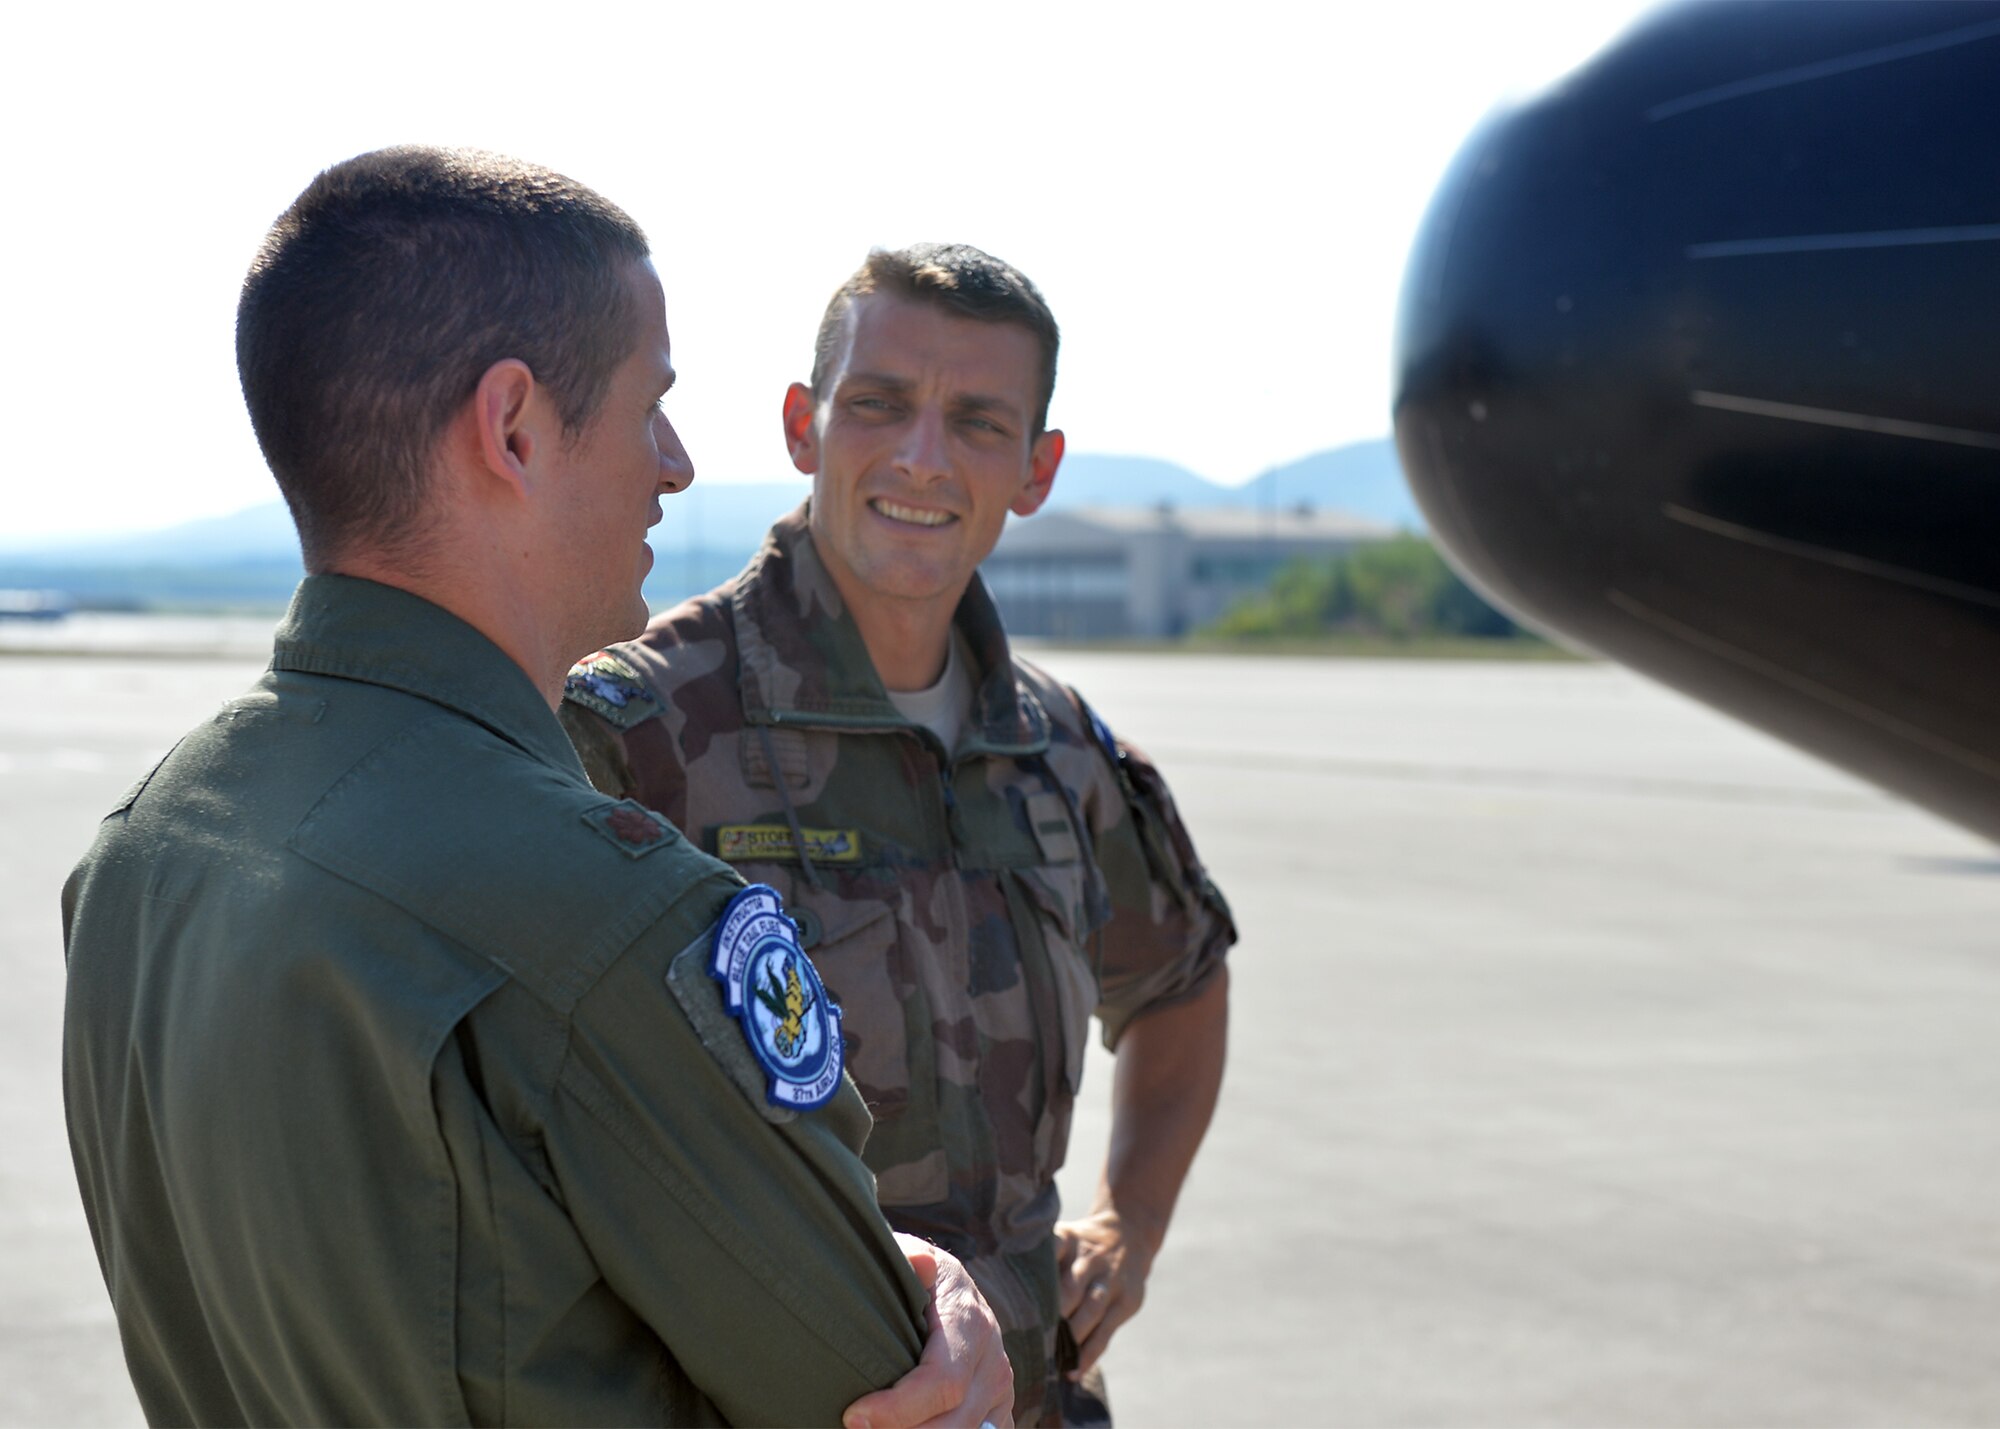 U.S. Air Force Maj. Matthew Hamblen, 37th Airlift Squadron standards and evaluations chief, speaks to a French C-130J Super Hercules aircraft pilot on Ramstein Air Base, Germany, Aug. 3, 2018. The 37th AS took an active role in assisting the French air force with their transition to the C-130J. (U.S. Air Force photo by Staff Sgt. Jimmie D. Pike)